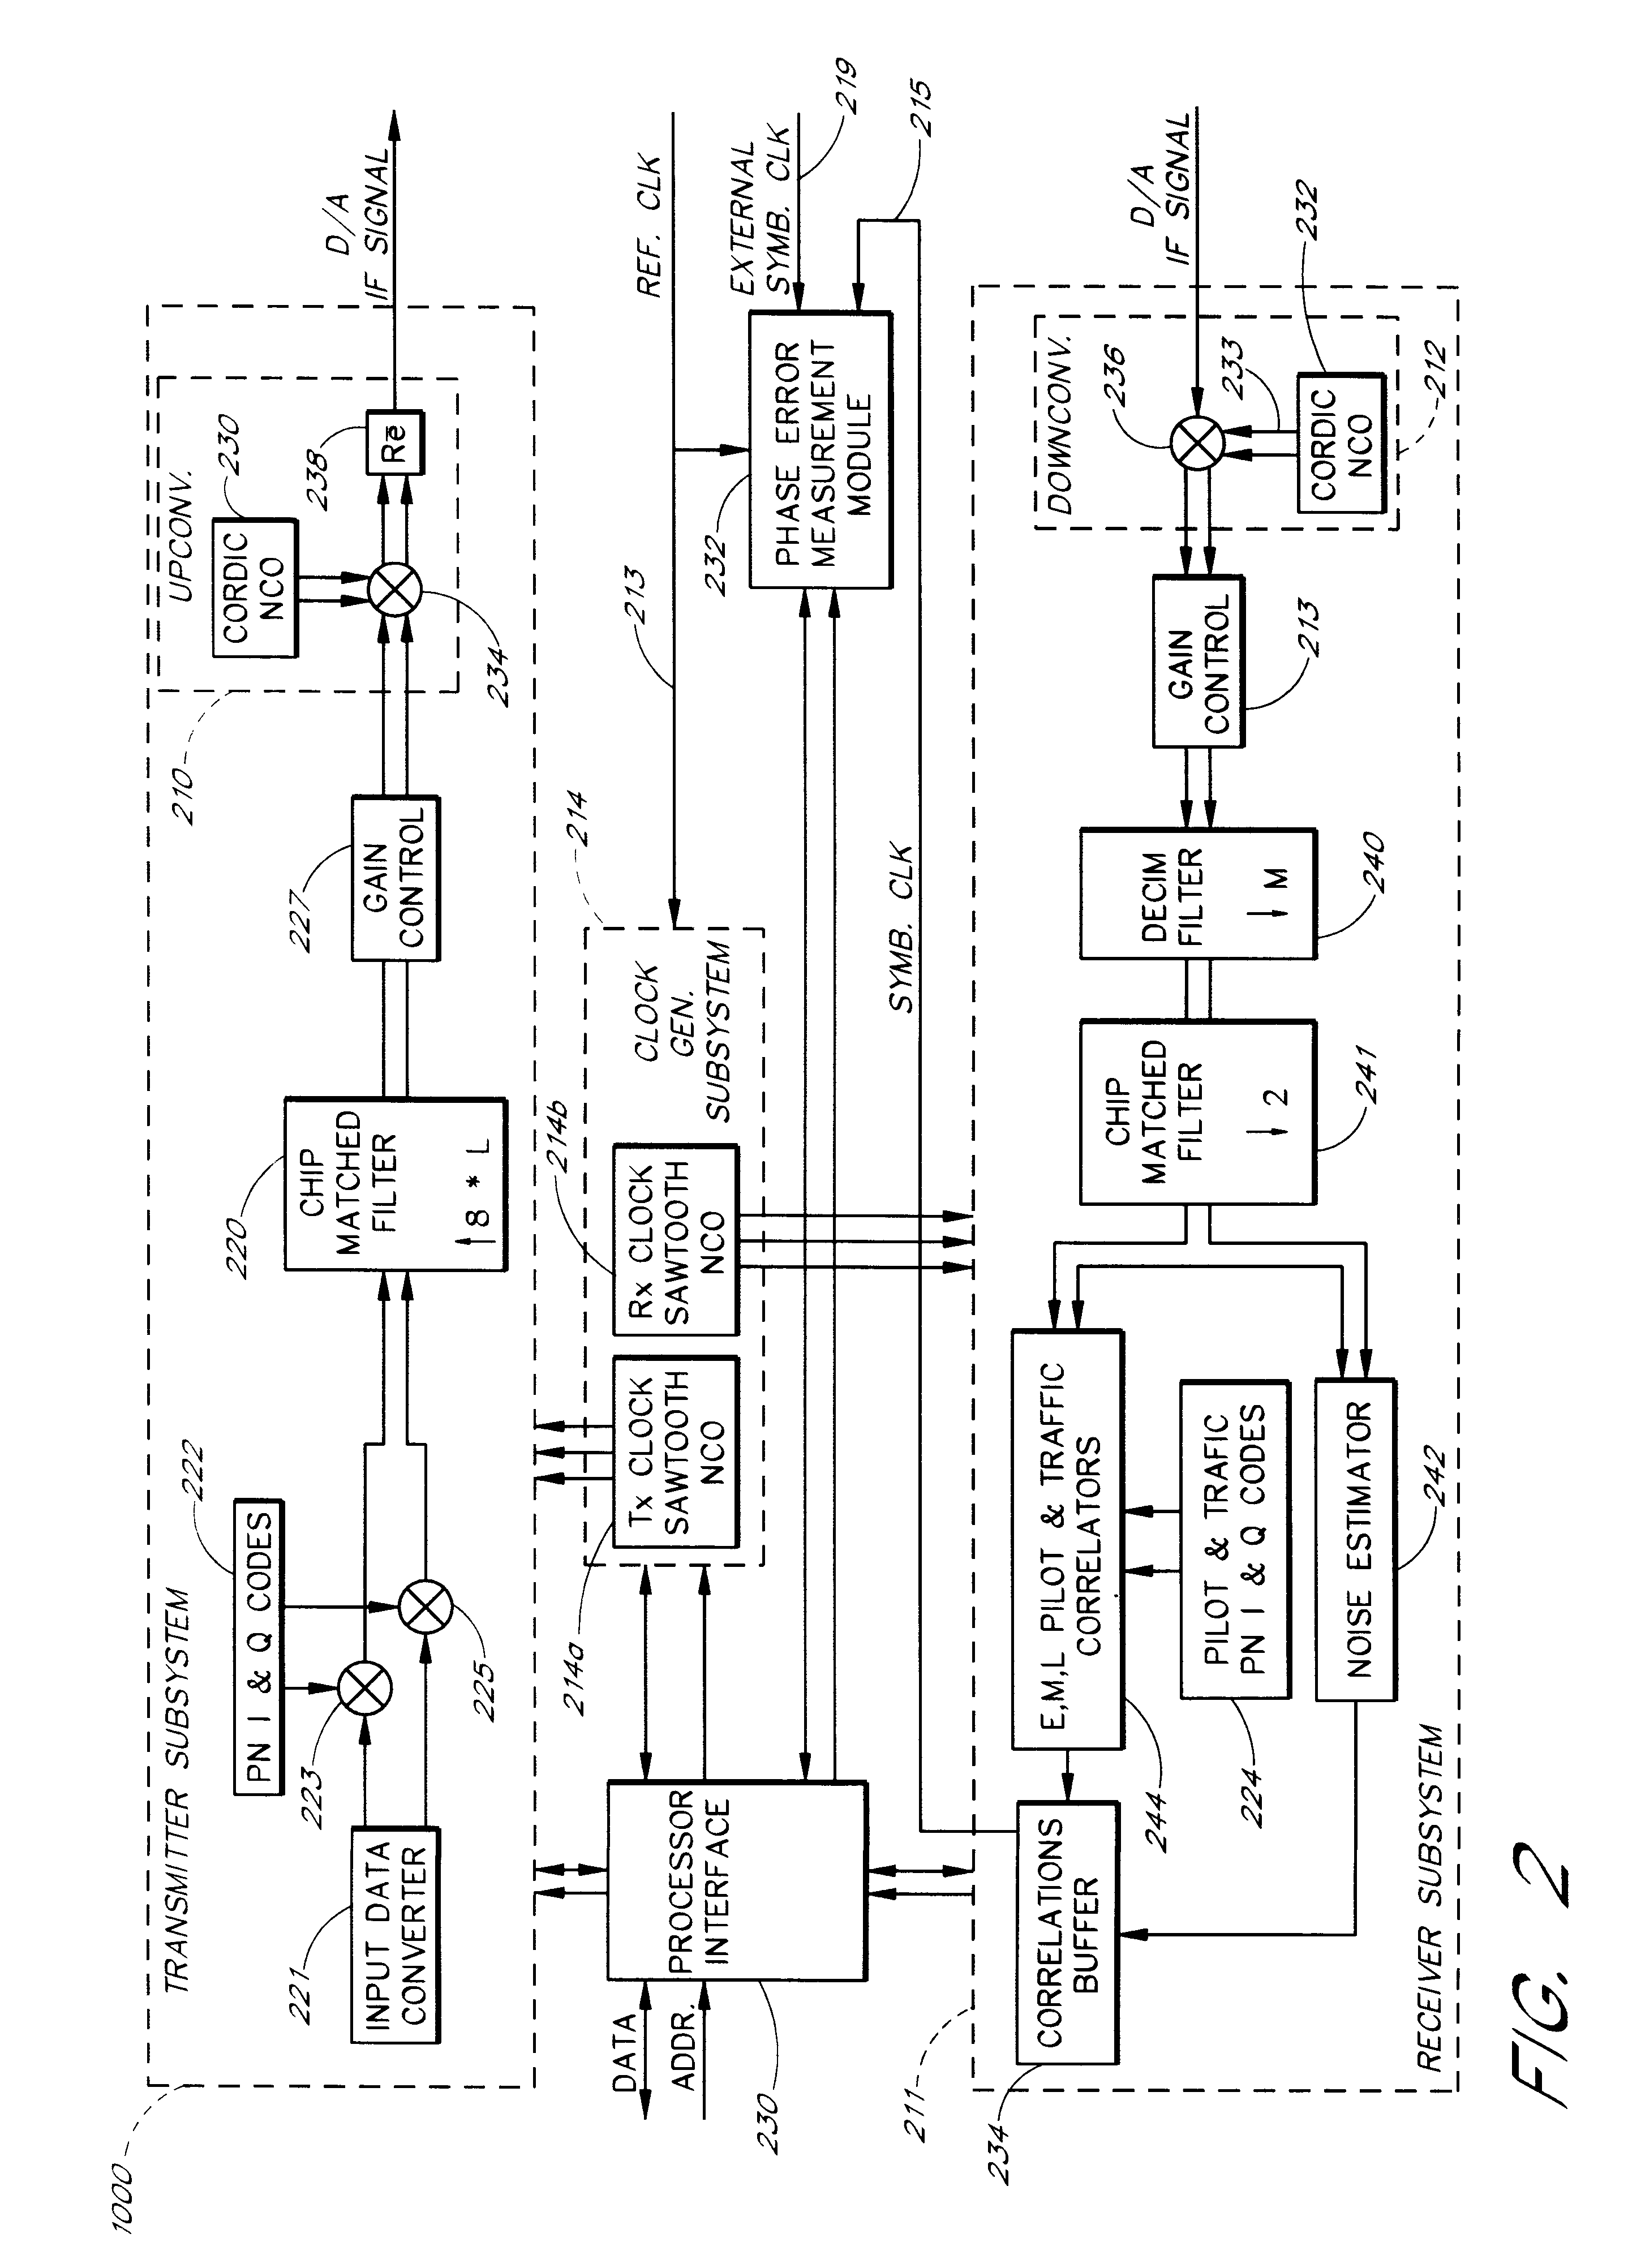 Programmable modem apparatus for transmitting and receiving digital data, design method and use method for the modem